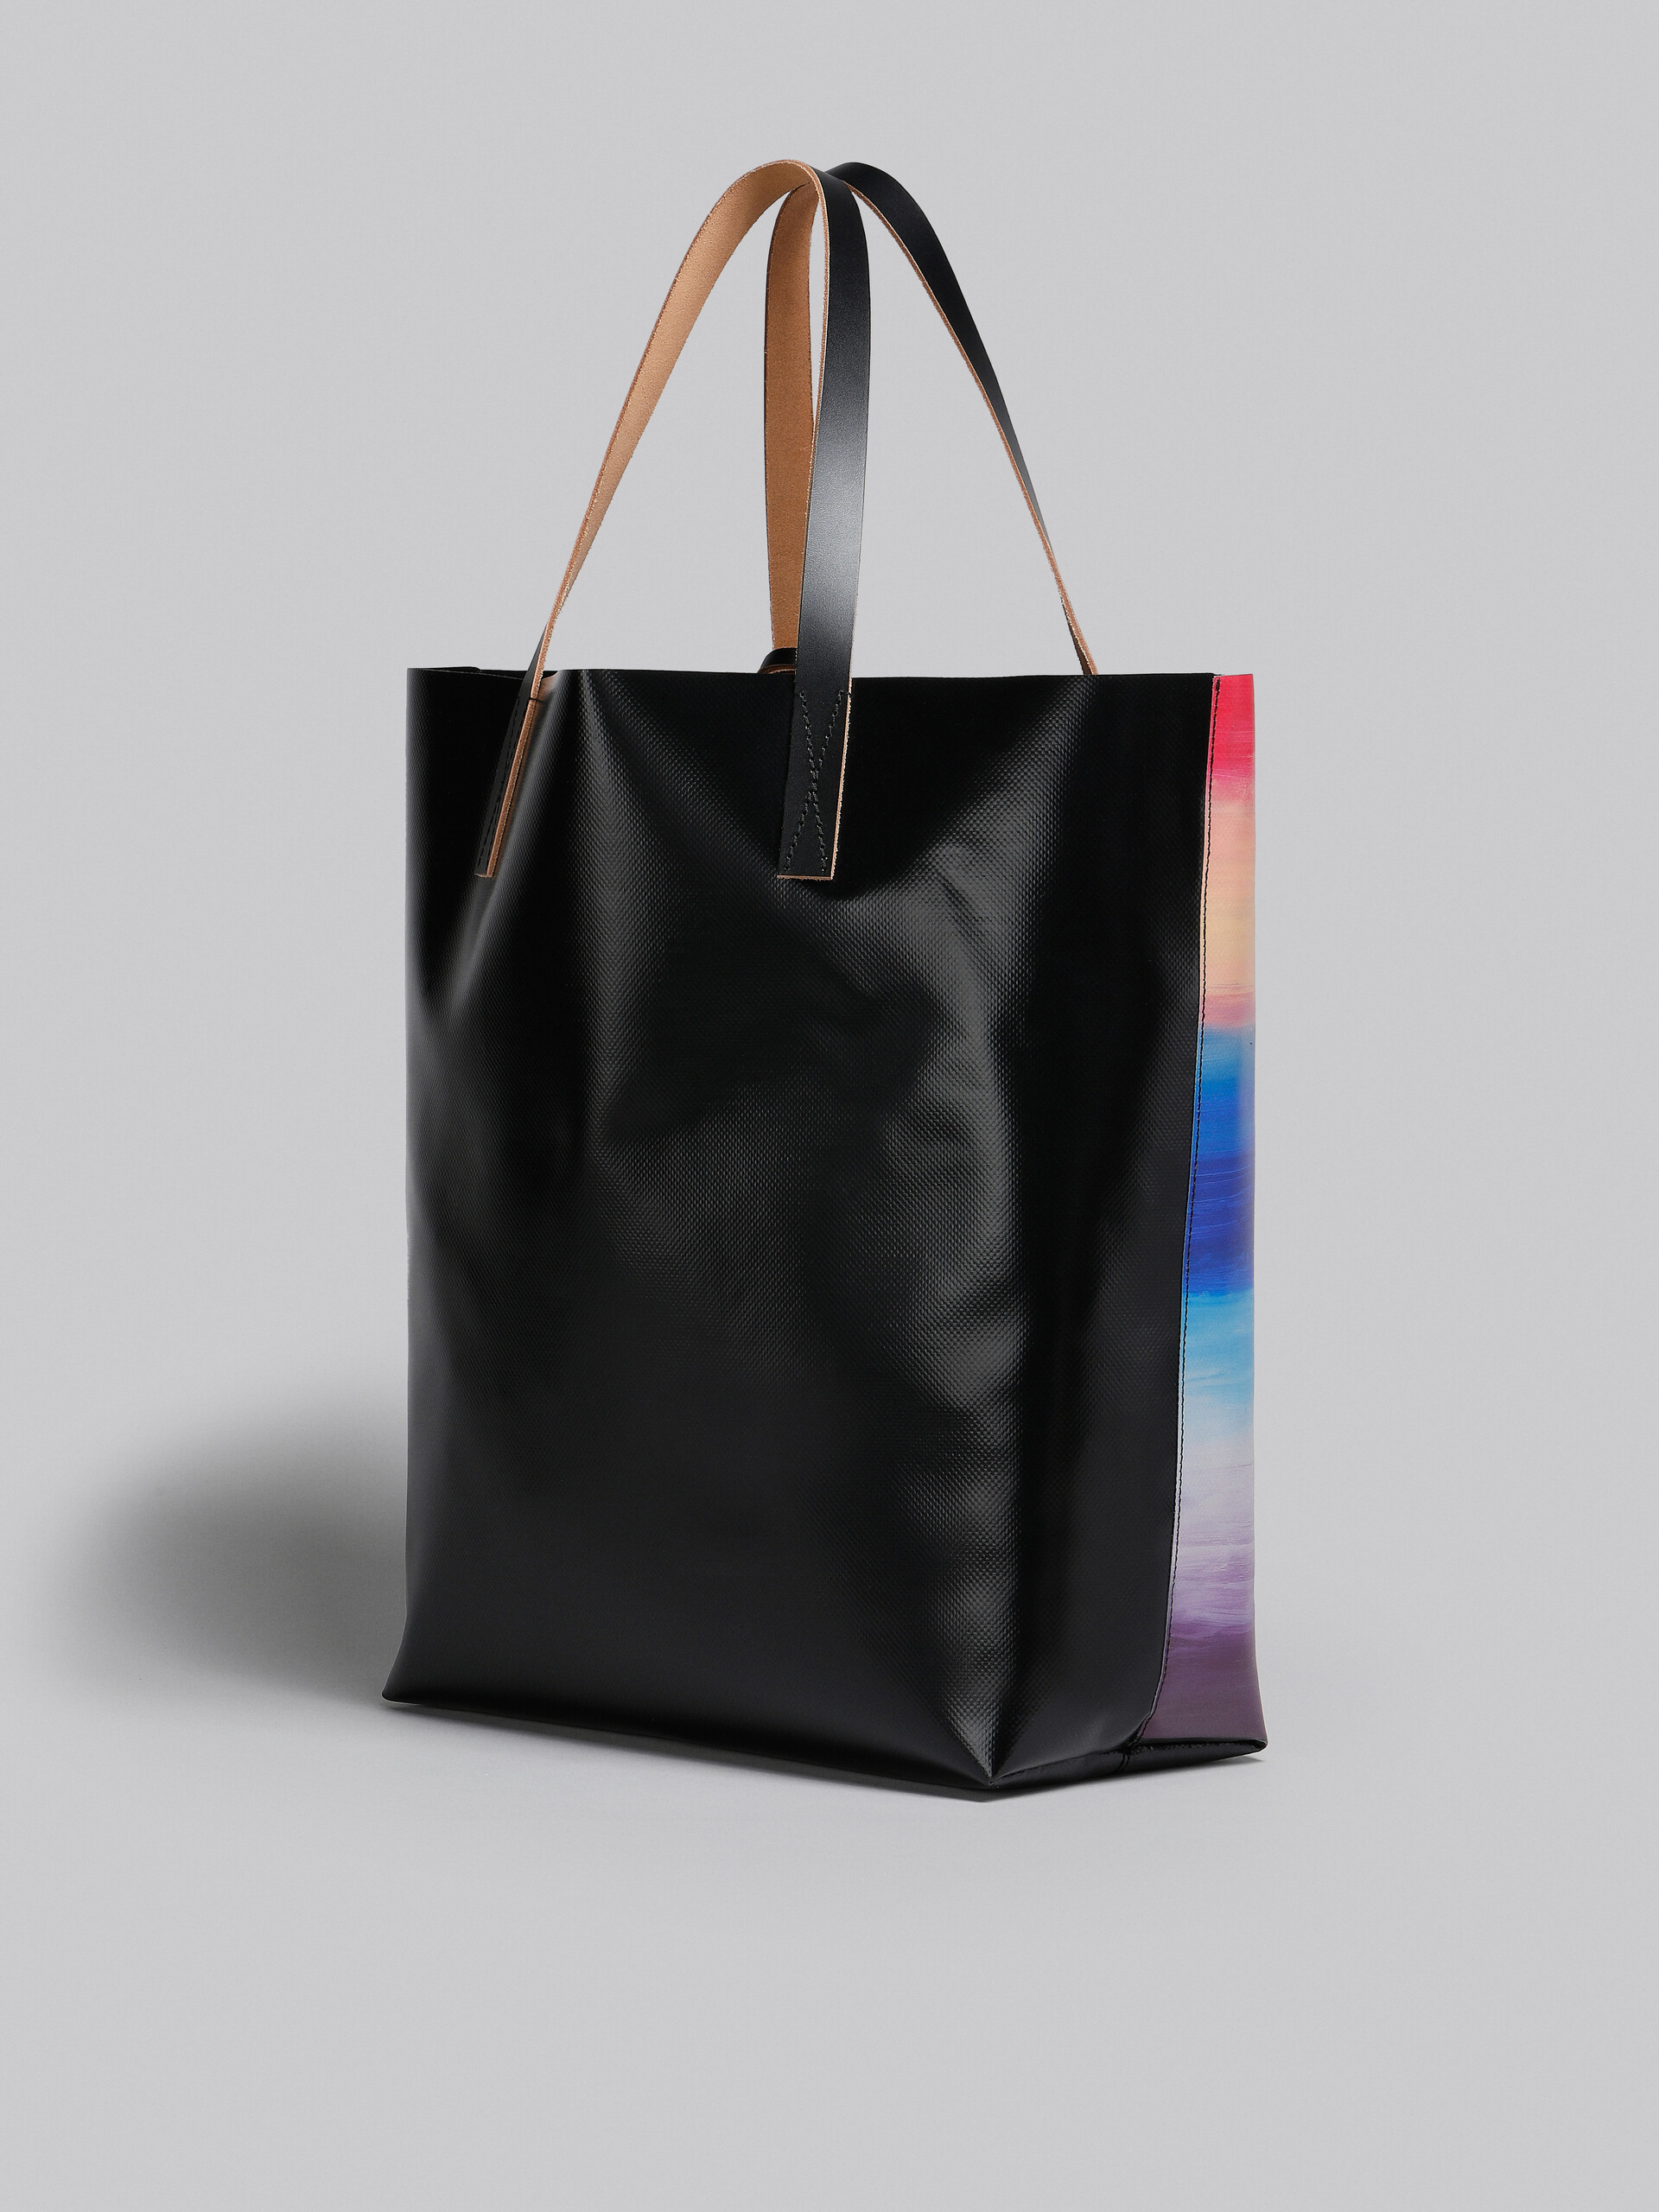 Tribeca shopping bag with Dark Side of the Moon print - Shopping Bags - Image 3